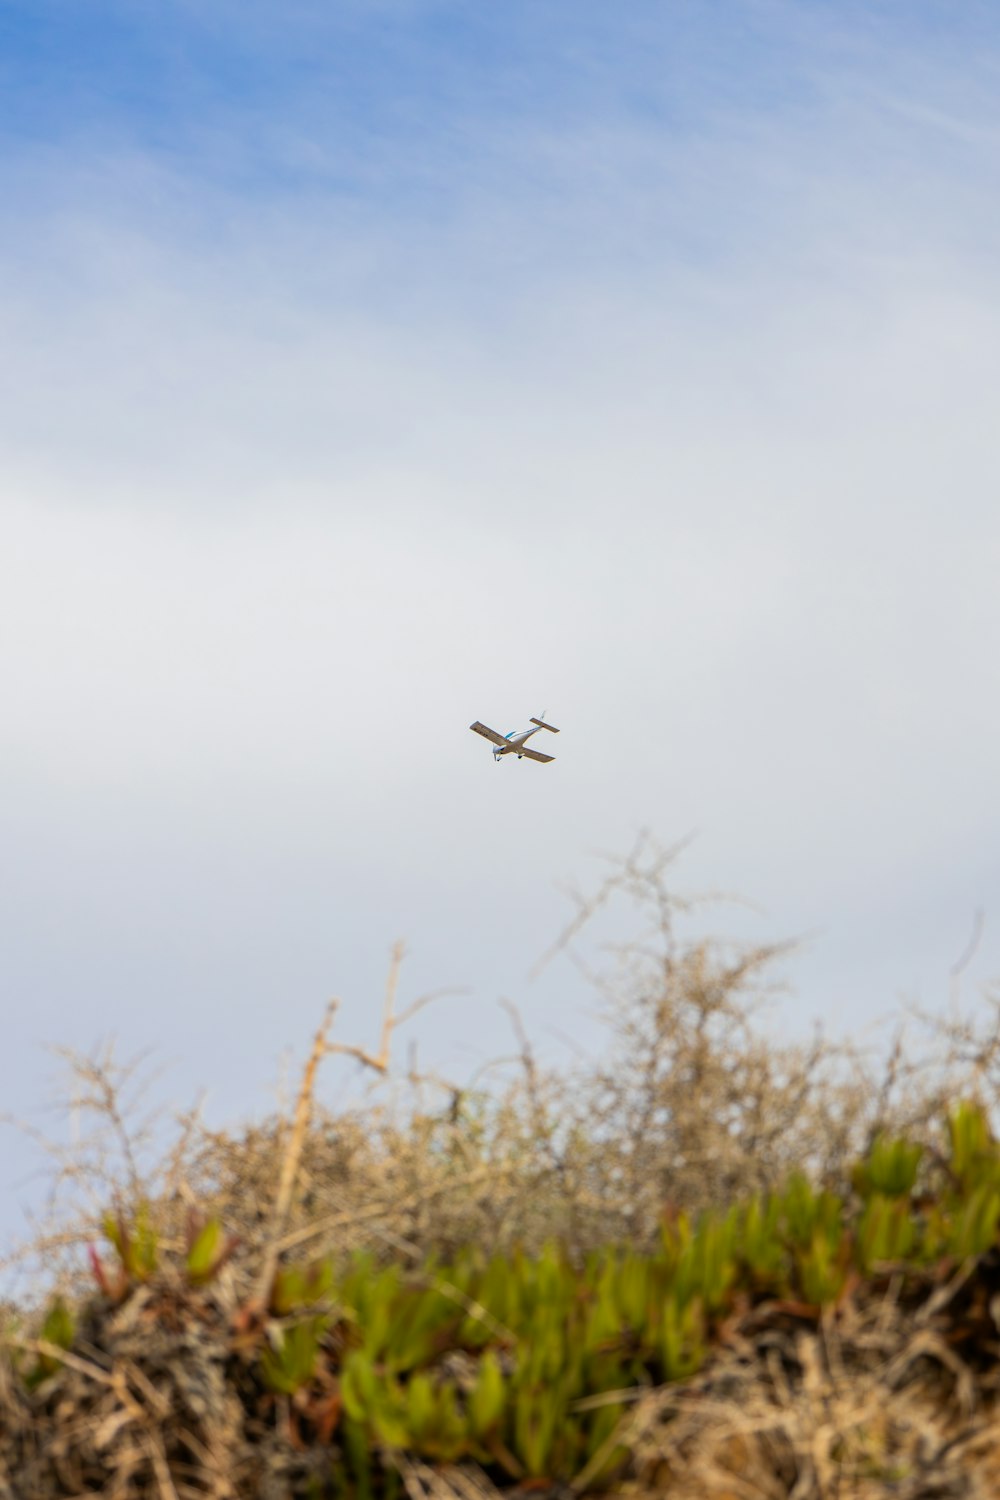 an airplane is flying over a grassy area